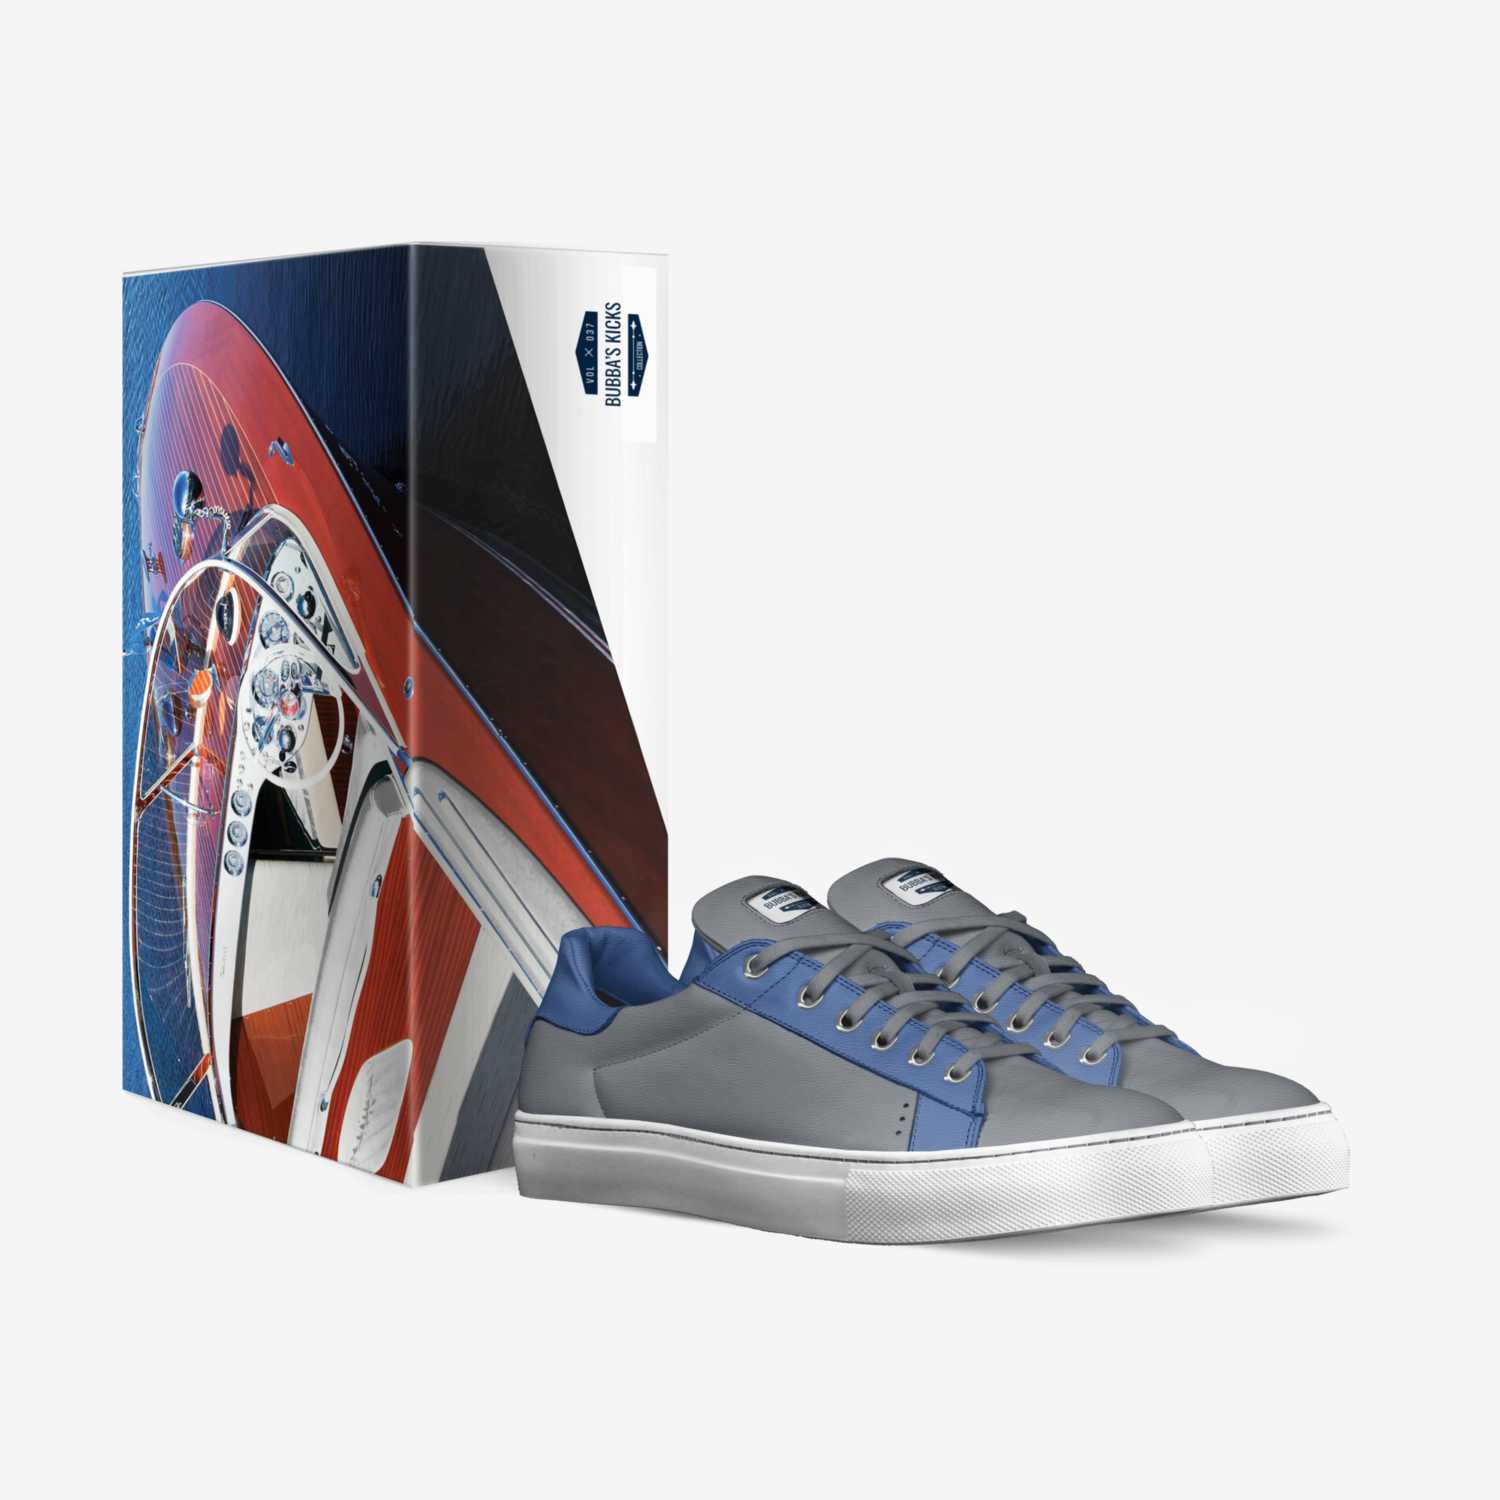 Bubba’s Kicks custom made in Italy shoes by Rich Walter | Box view